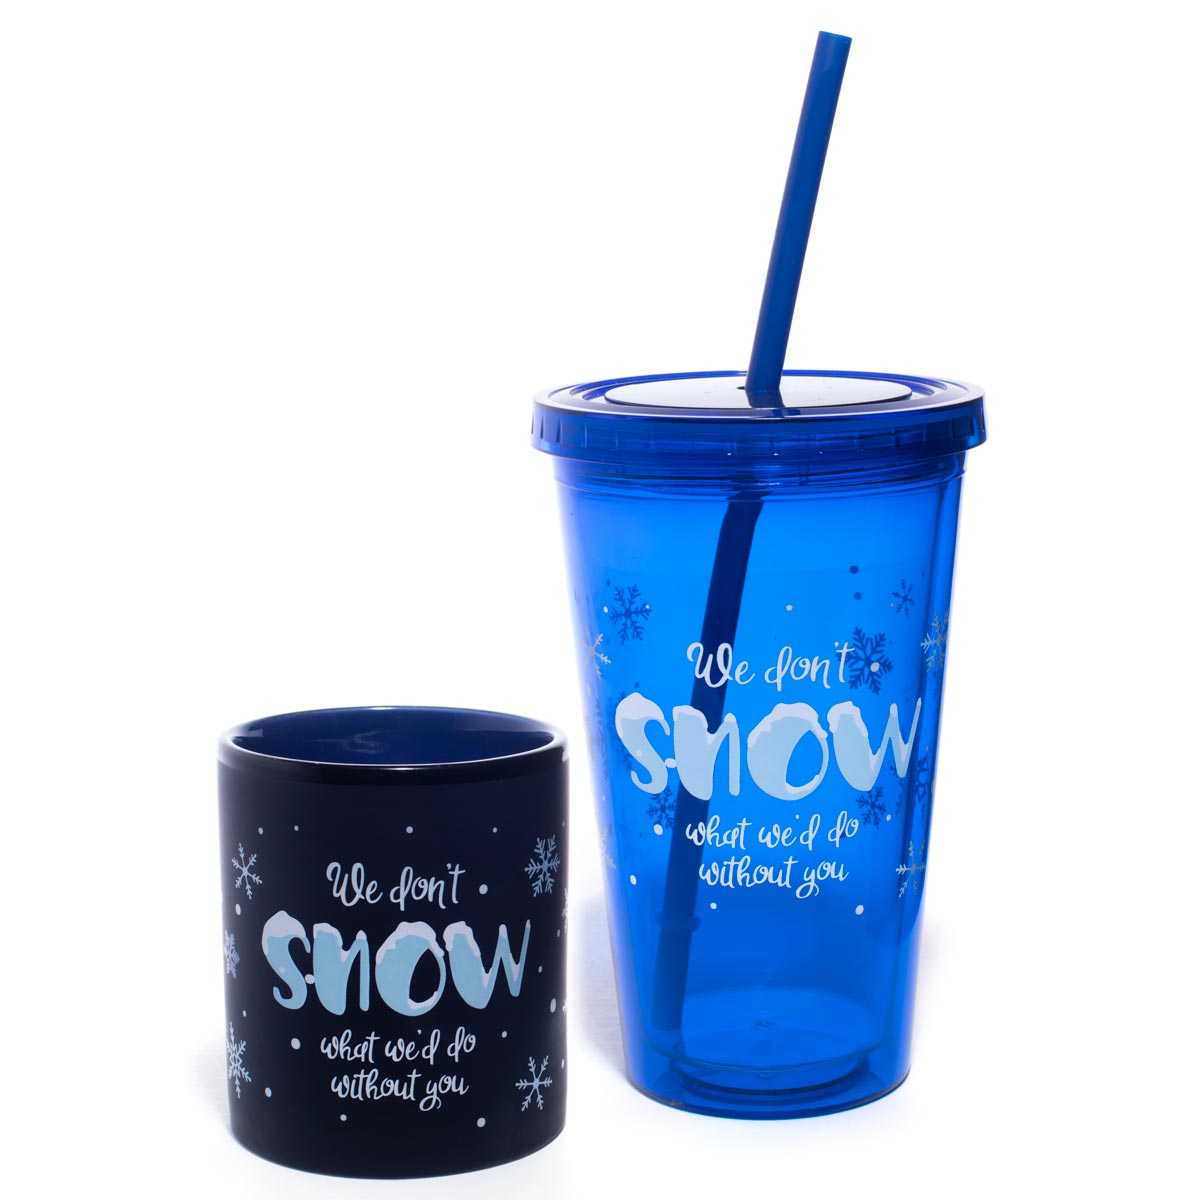 https://www.itselementary.com/-/media/Products/ie/teacher-appreciation-gifts/sets/elsnowset-mug-and-tumbler-gift-set-we-dont-snow-000.ashx